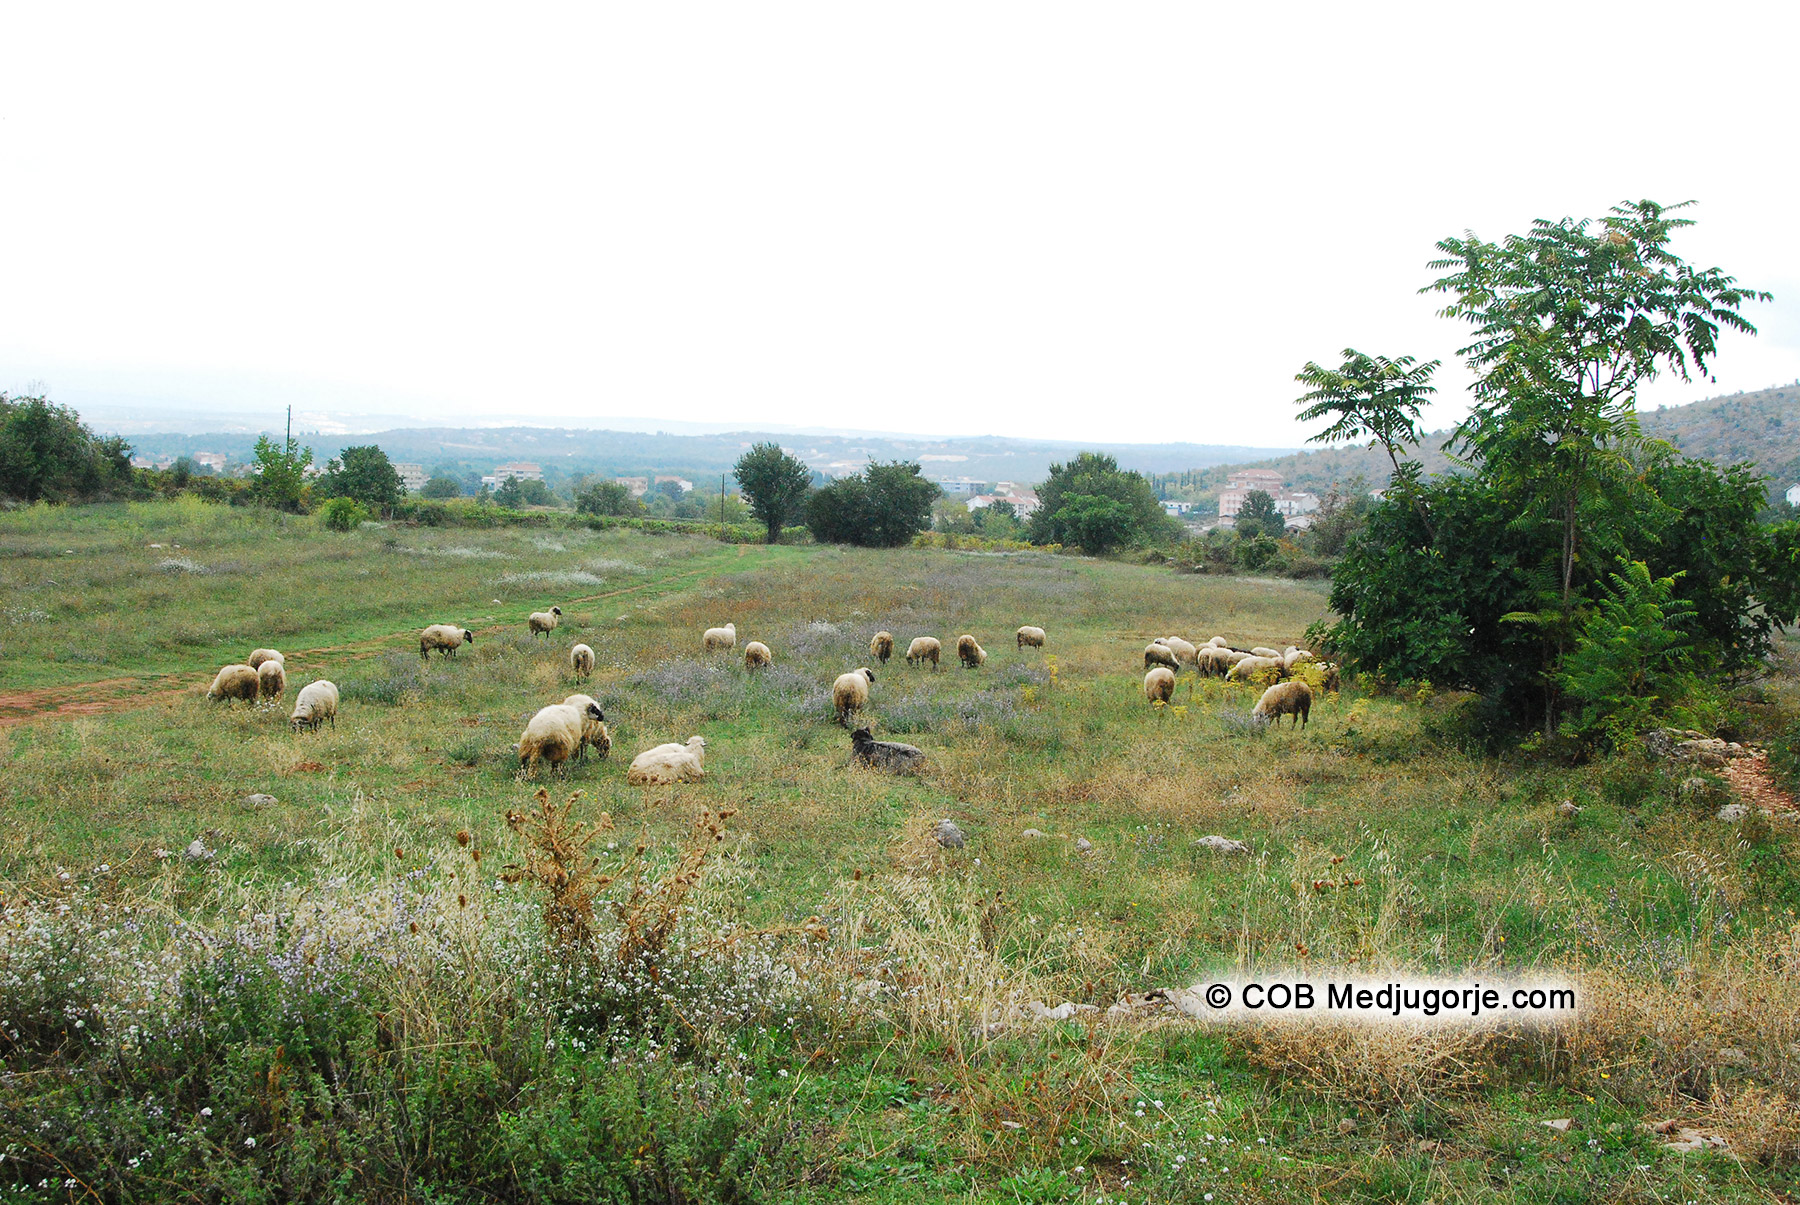  a flock of sheep grazing in Medjugorje